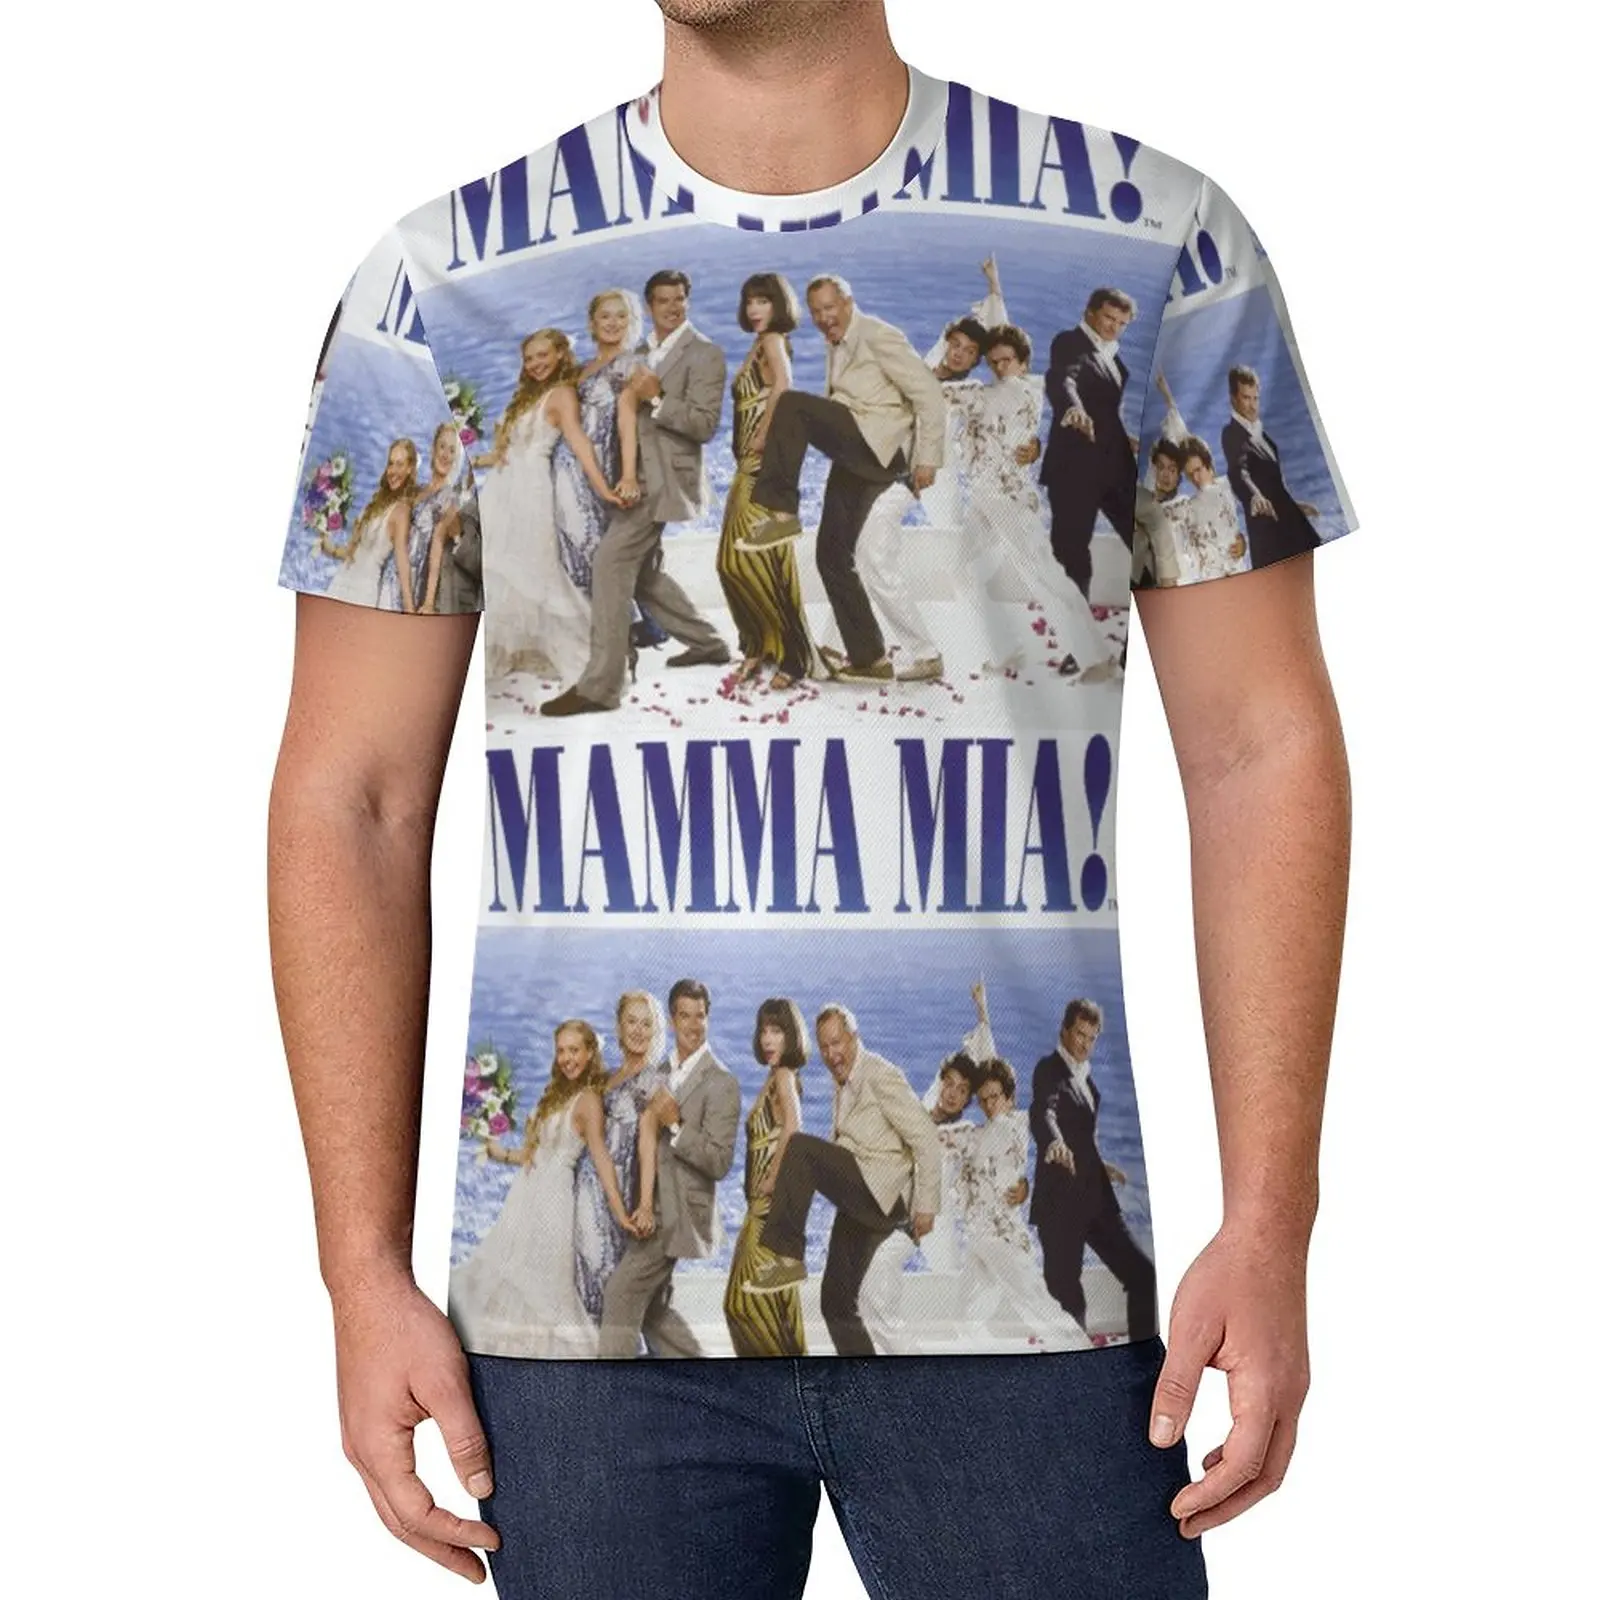 

Mamma Mia Cast Poster T Shirt Hippie T-Shirts Short Sleeves Printed Tops Cheap Summer Streetwear Oversized Top Tees